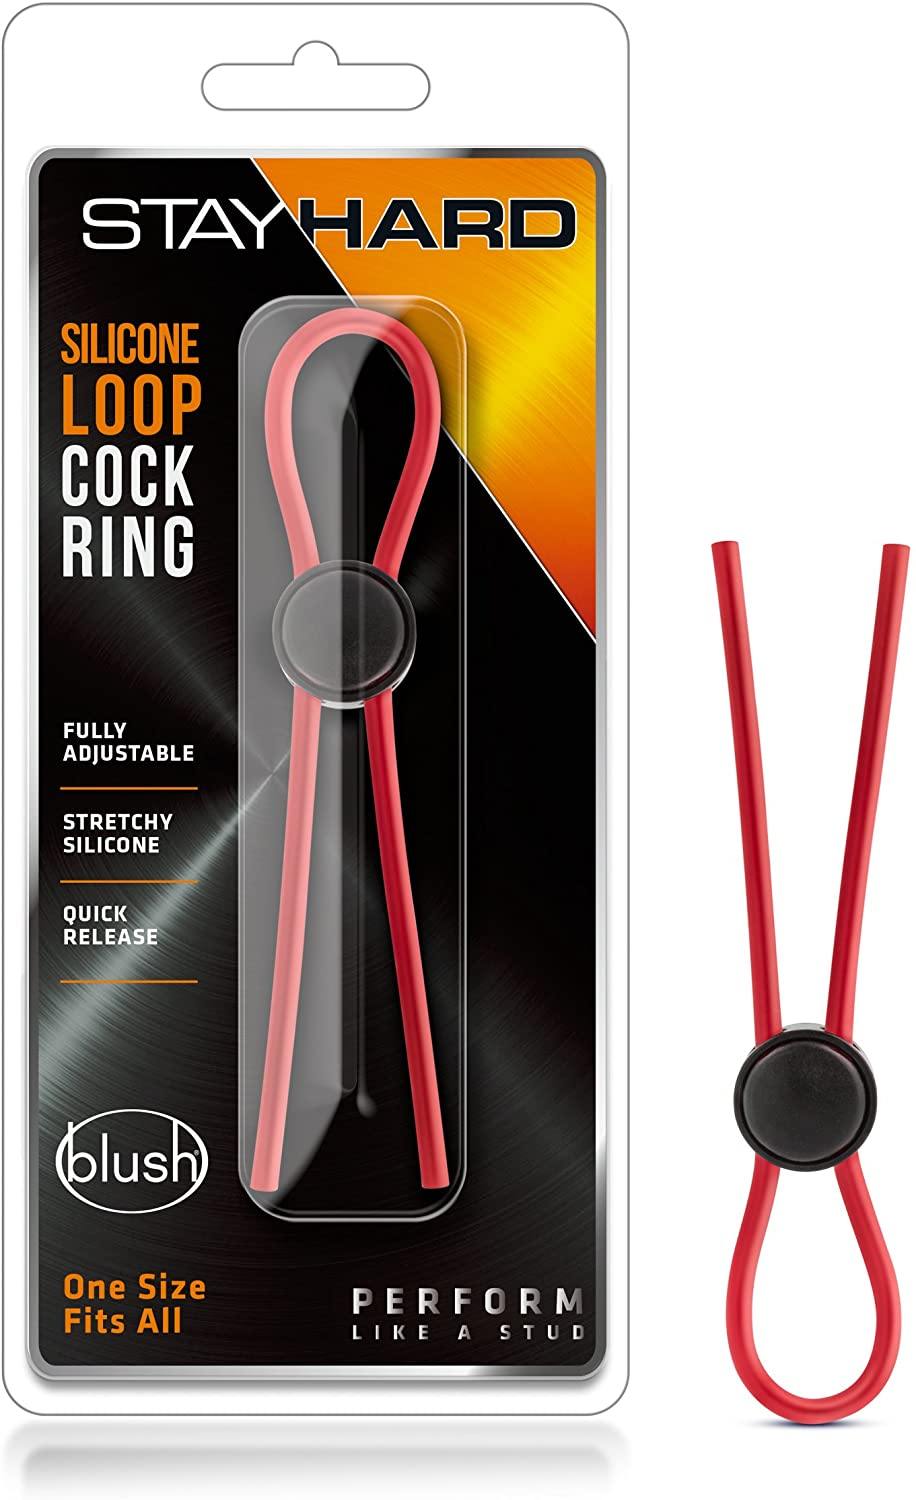 Silicone Loop Cock Ring by Stay Hard by Blush - Boink Adult Boutique www.boinkmuskoka.com Canada